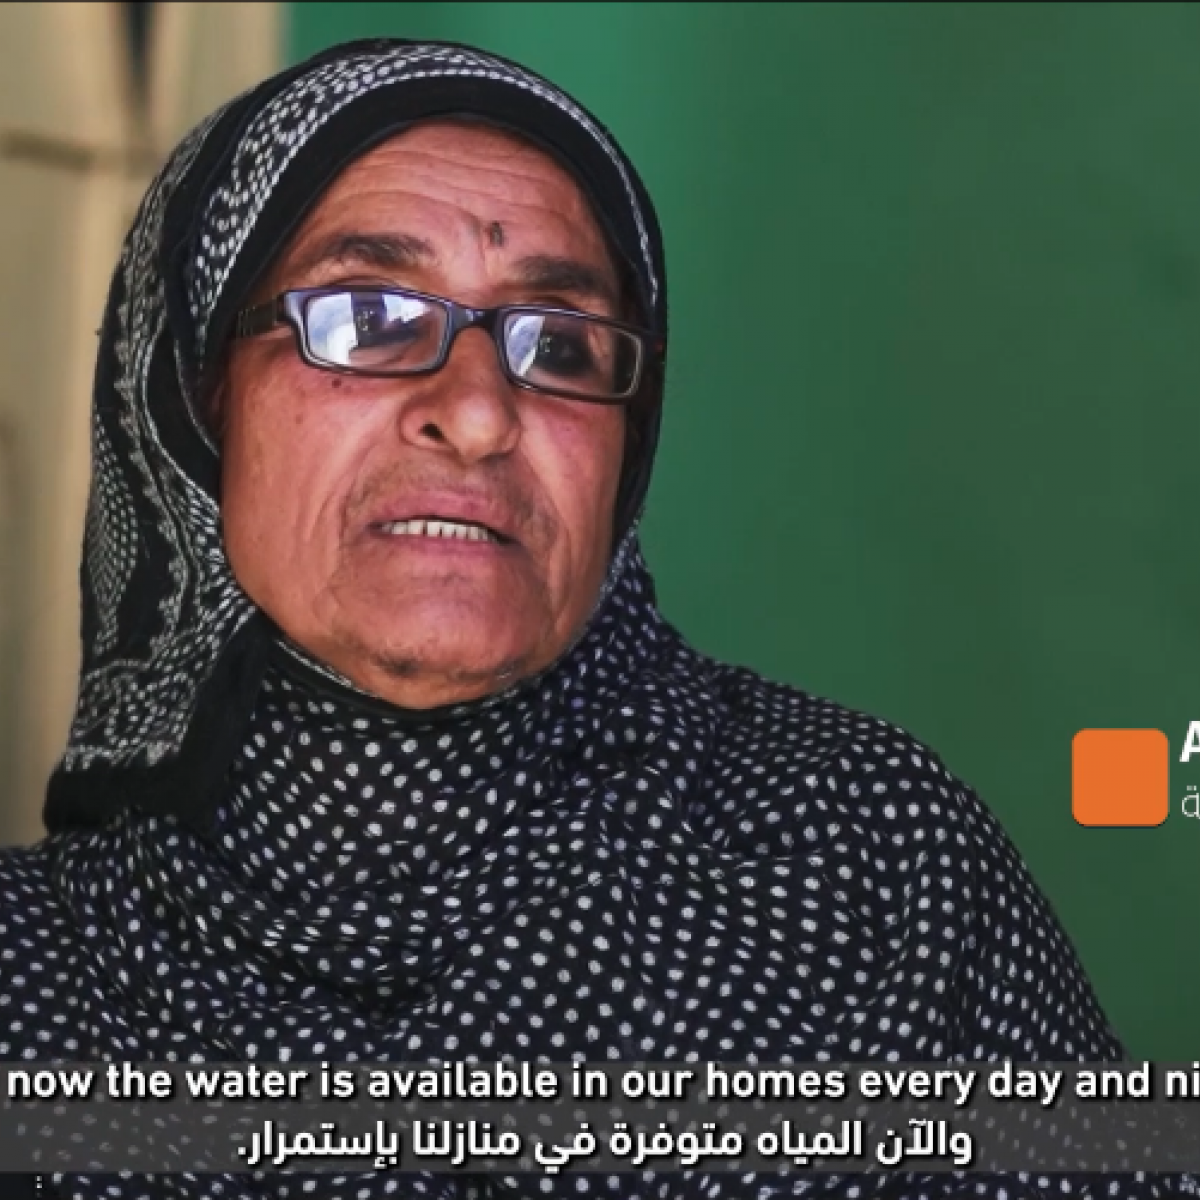 USAID and CARE support access to water for Yemeni families.